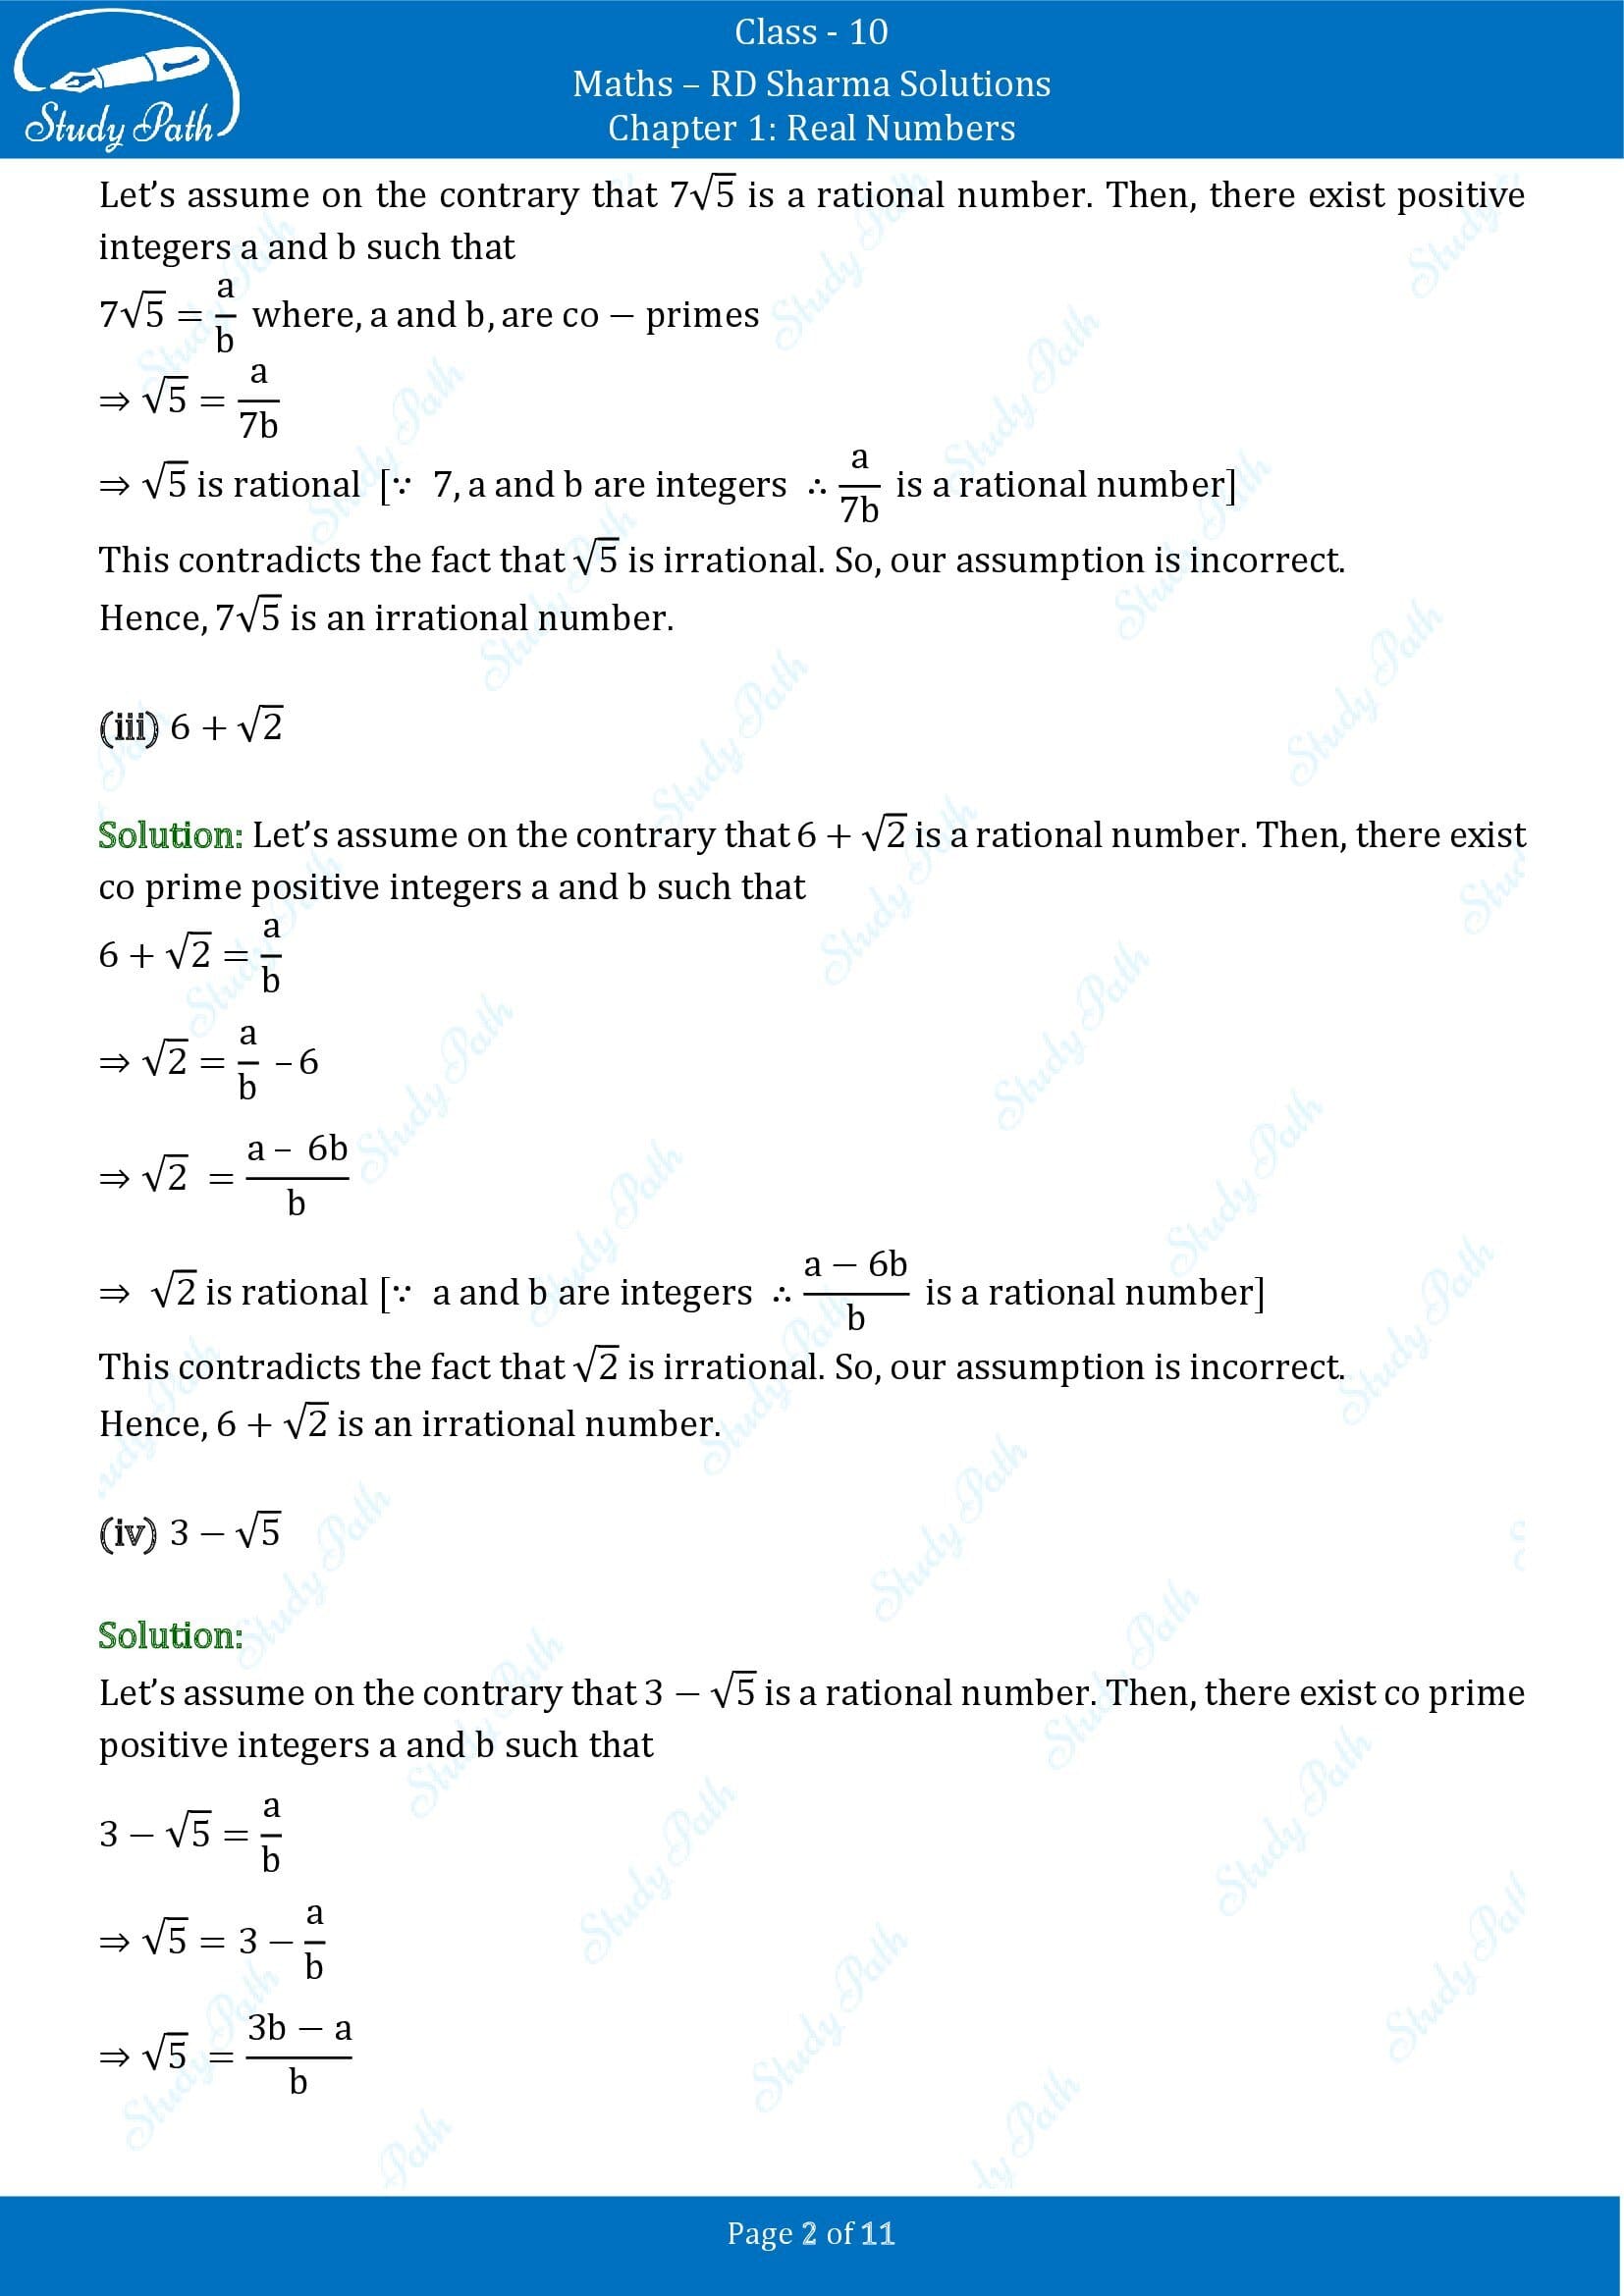 RD Sharma Solutions Class 10 Chapter 1 Real Numbers Exercise 1.5 00002